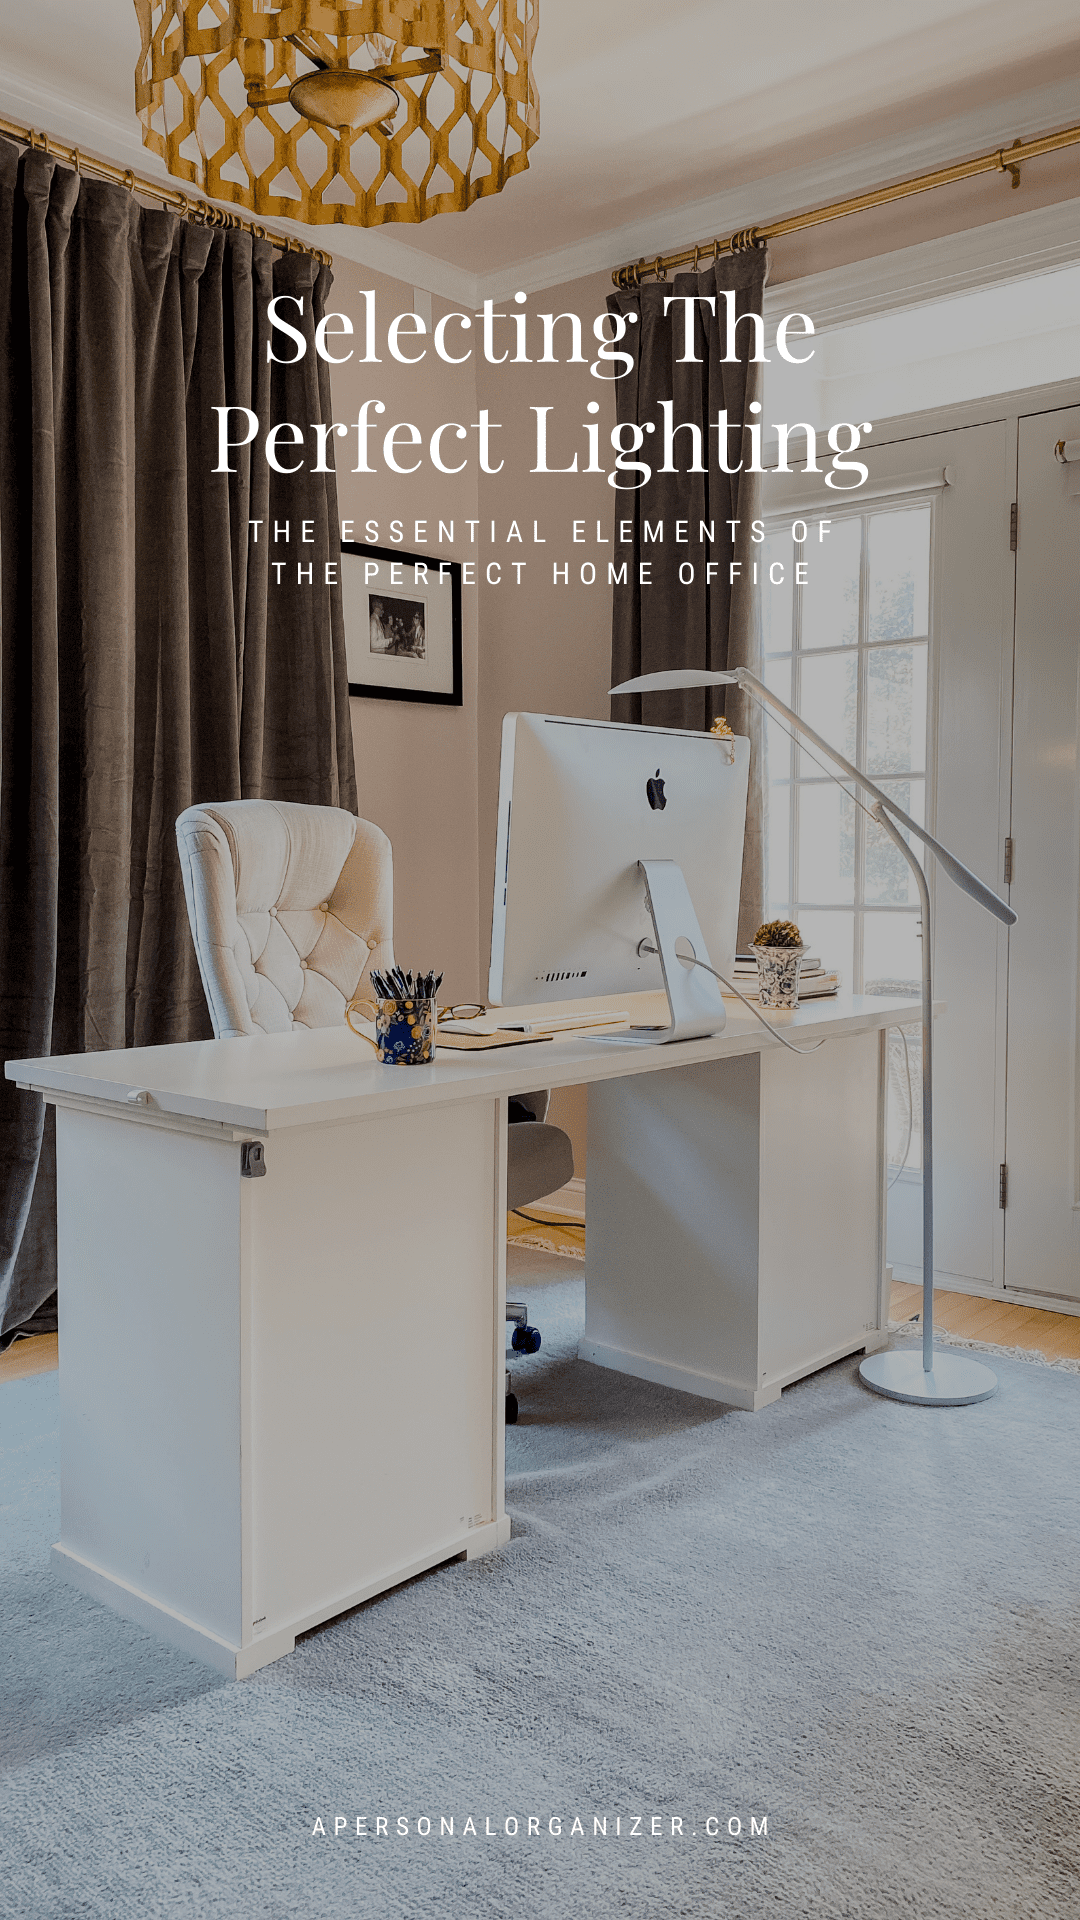 https://apersonalorganizer.com/wp-content/uploads/2022/07/Create-Your-Perfect-Home-Office-With-Cricut-Lighting-6.png